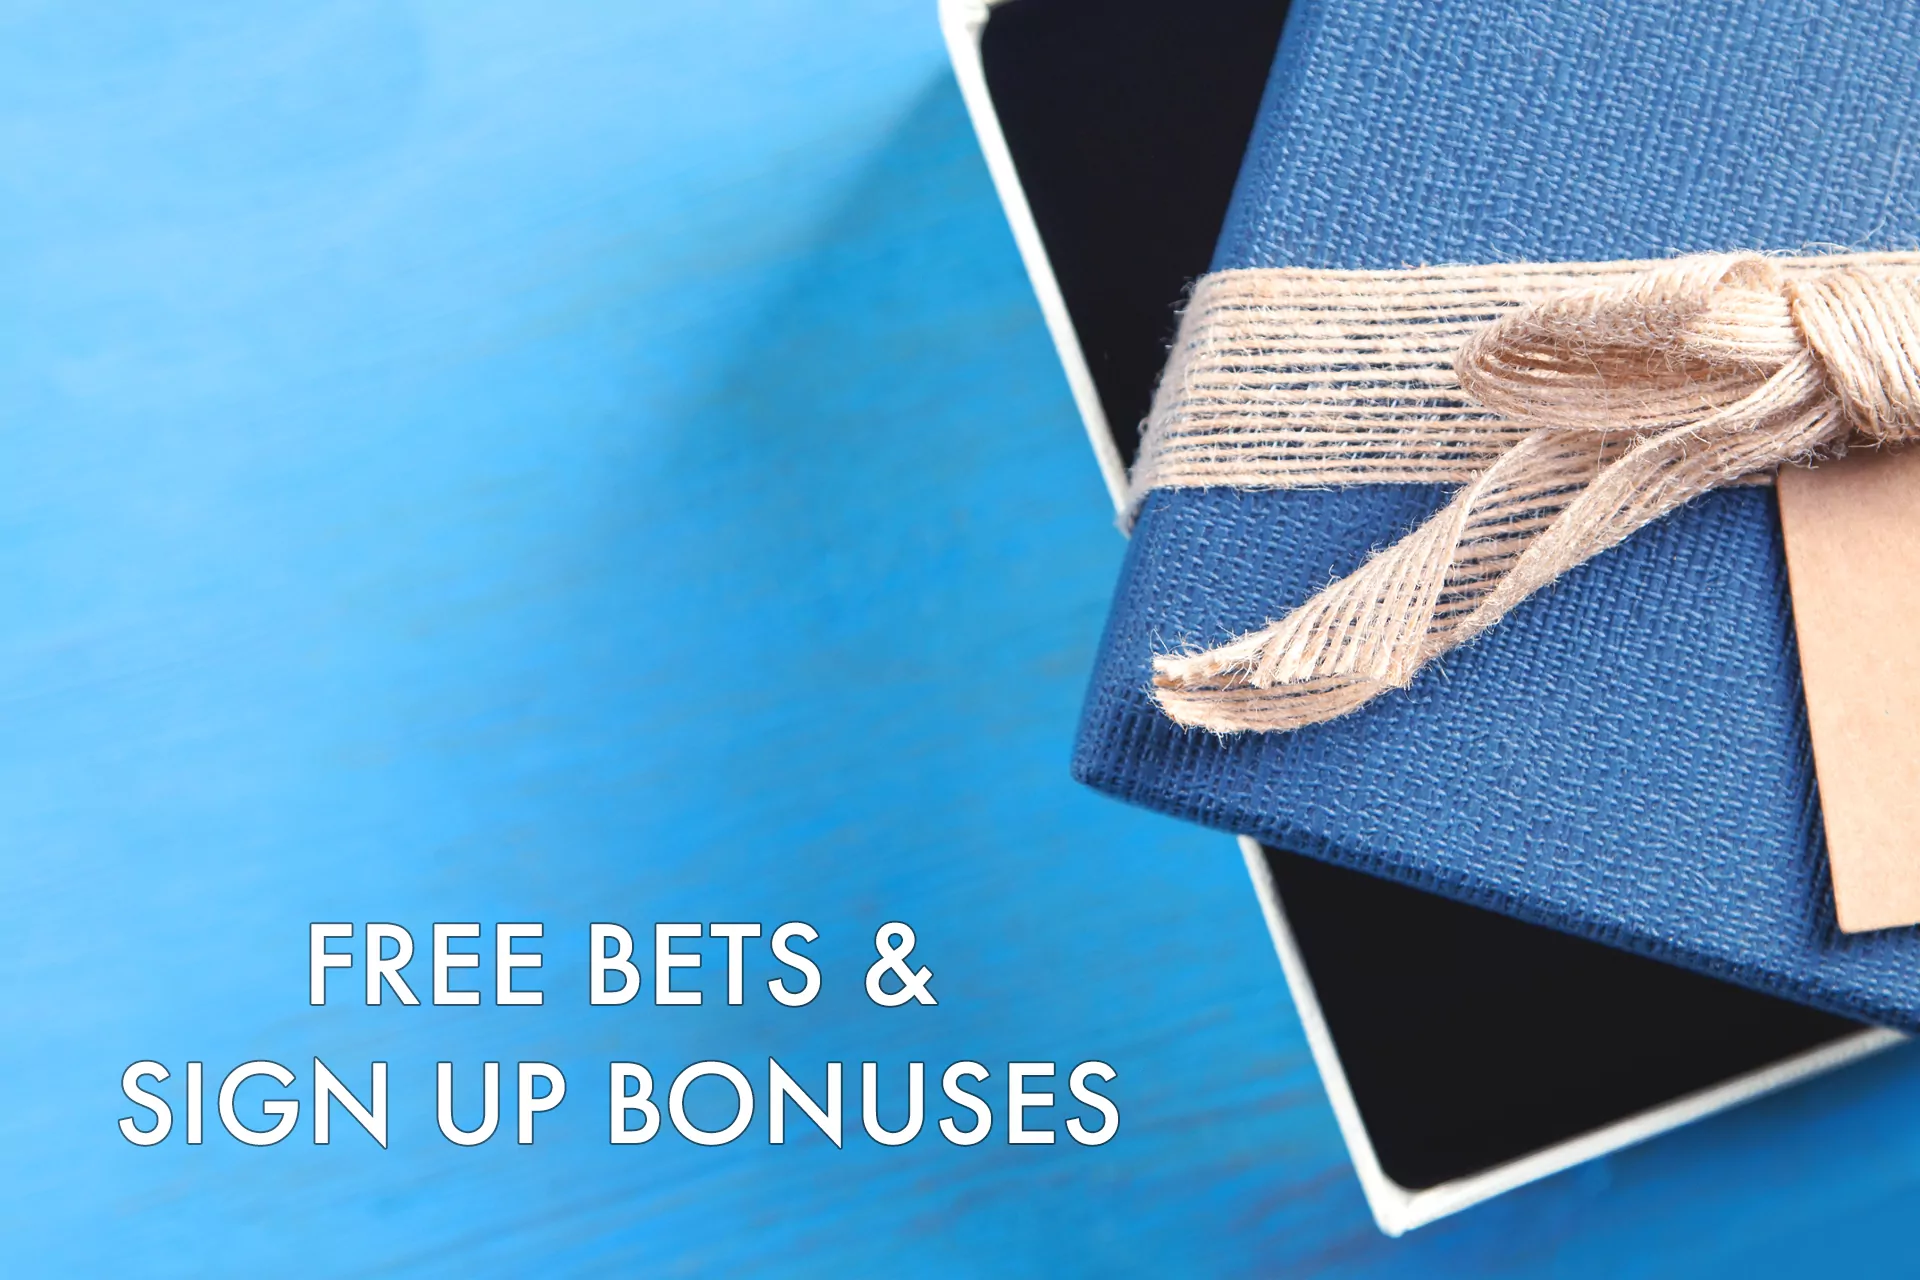 Free bets bonus allows players to place some bets without spending money from a betting account.